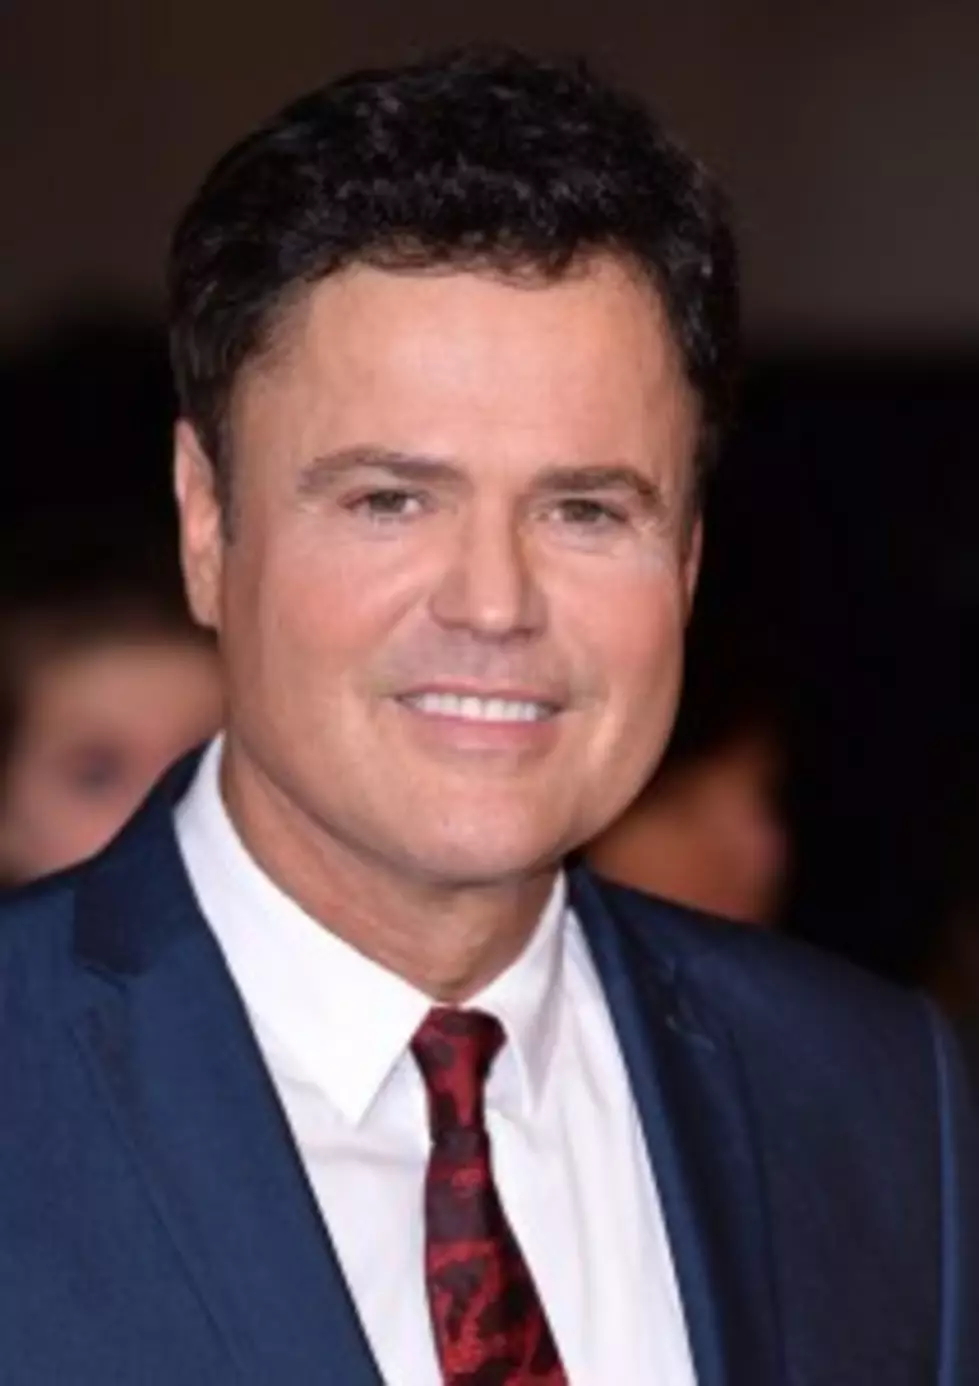 Hear Donny Osmond On The Mix Morning Rush With Laura Daniels [AUDIO]